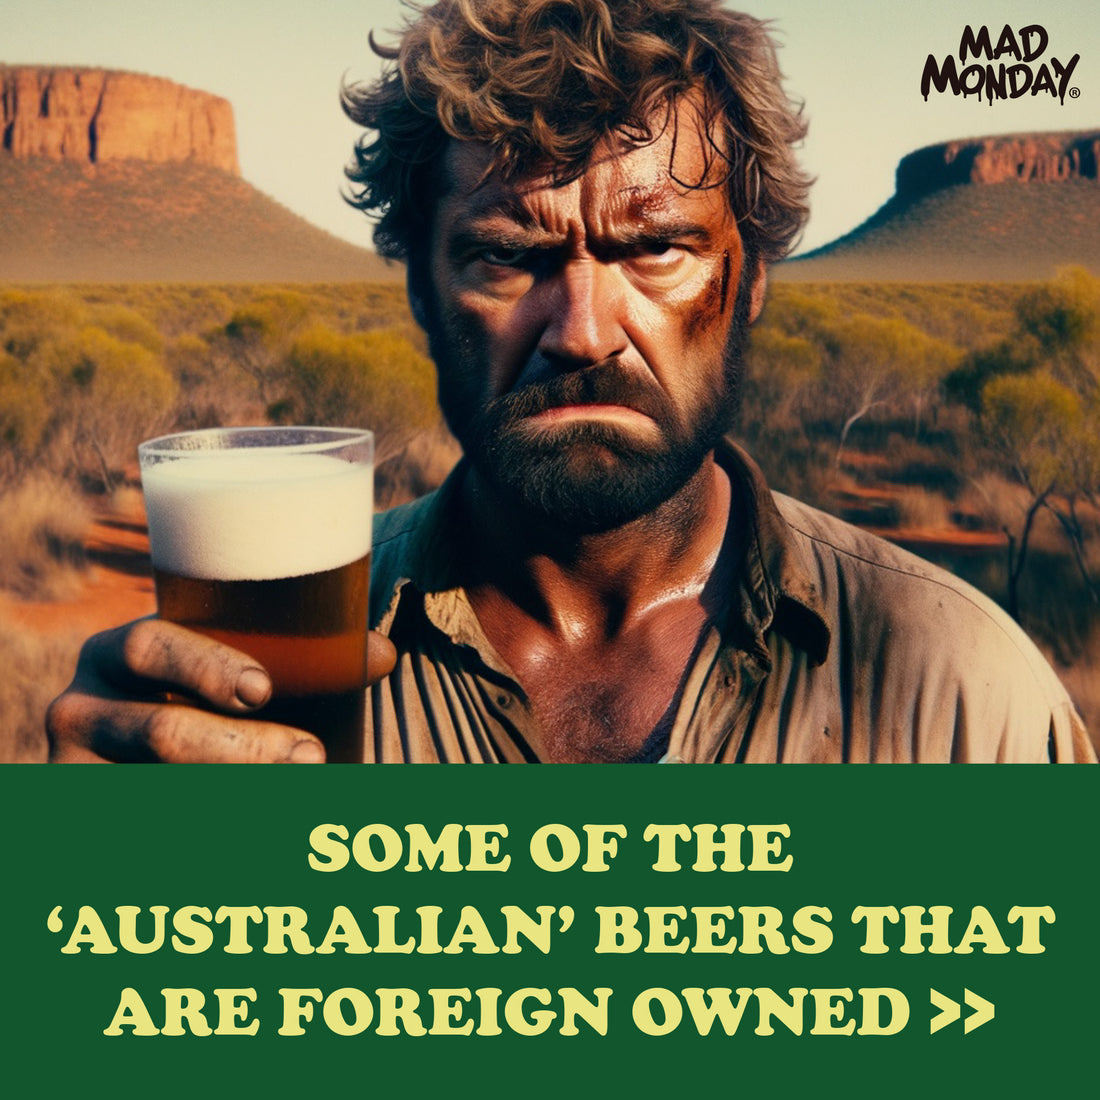 Some of the 'Australian' Beers that are Foreign Owned: